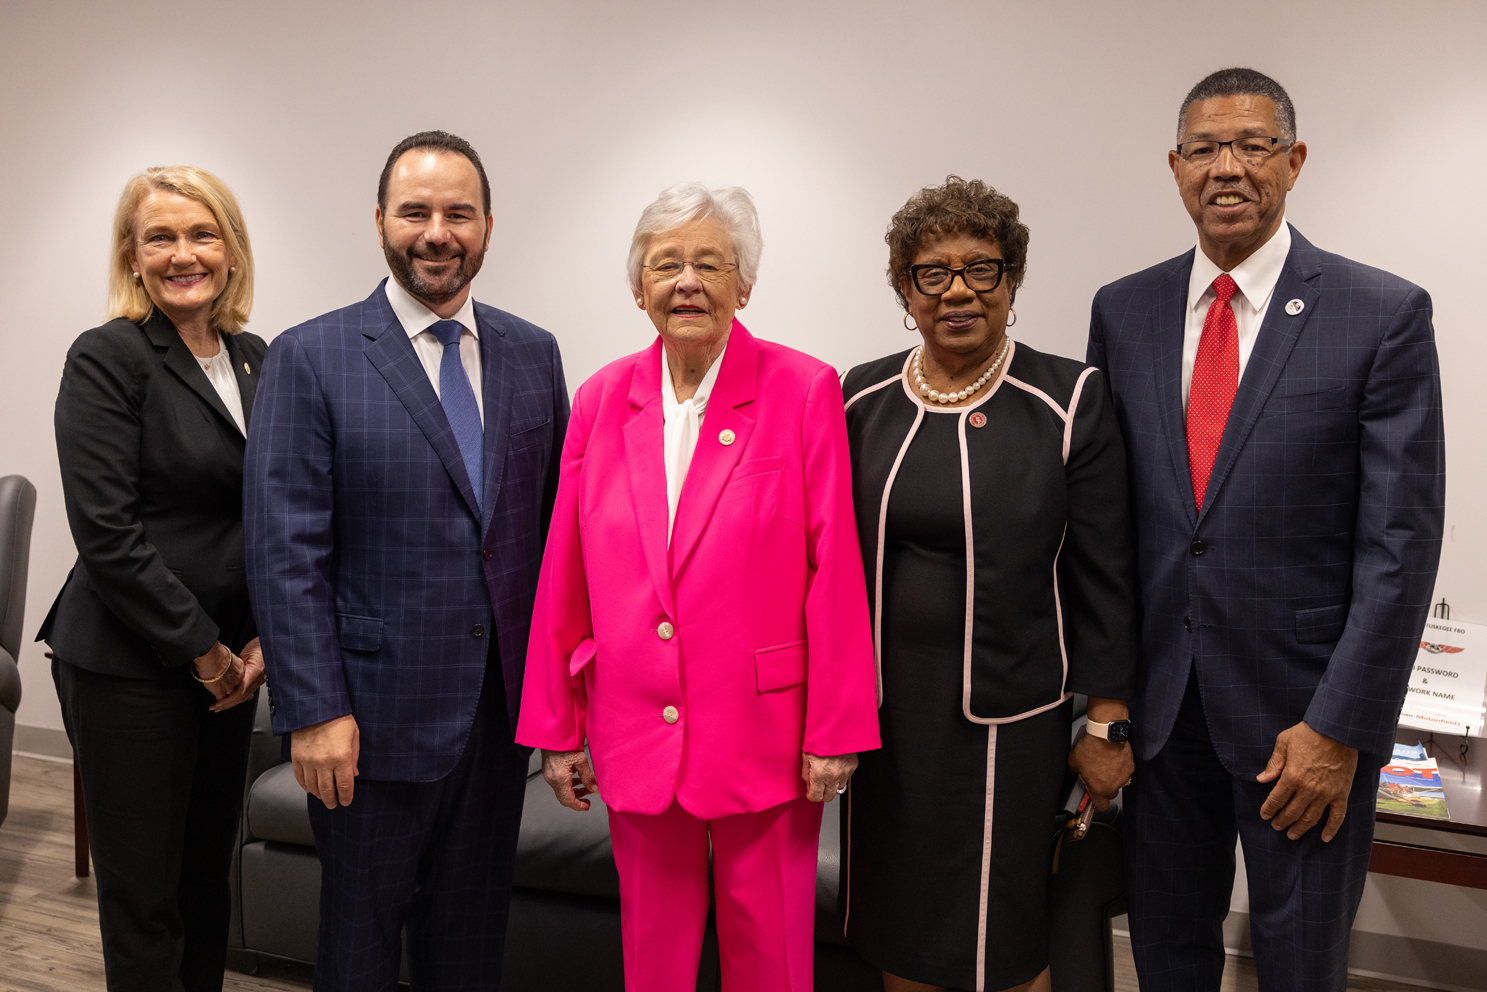 From left to right: Ellen McNair, Secretary of the Alabama Department of Commerce, Matt Koscal, Executive Vice President and Chief Administrative Officer, Republic Airways Holdings Inc., Gov. Kay Ivey, Dr. Morris, and Tuskegee Mayor Tony Haygood.